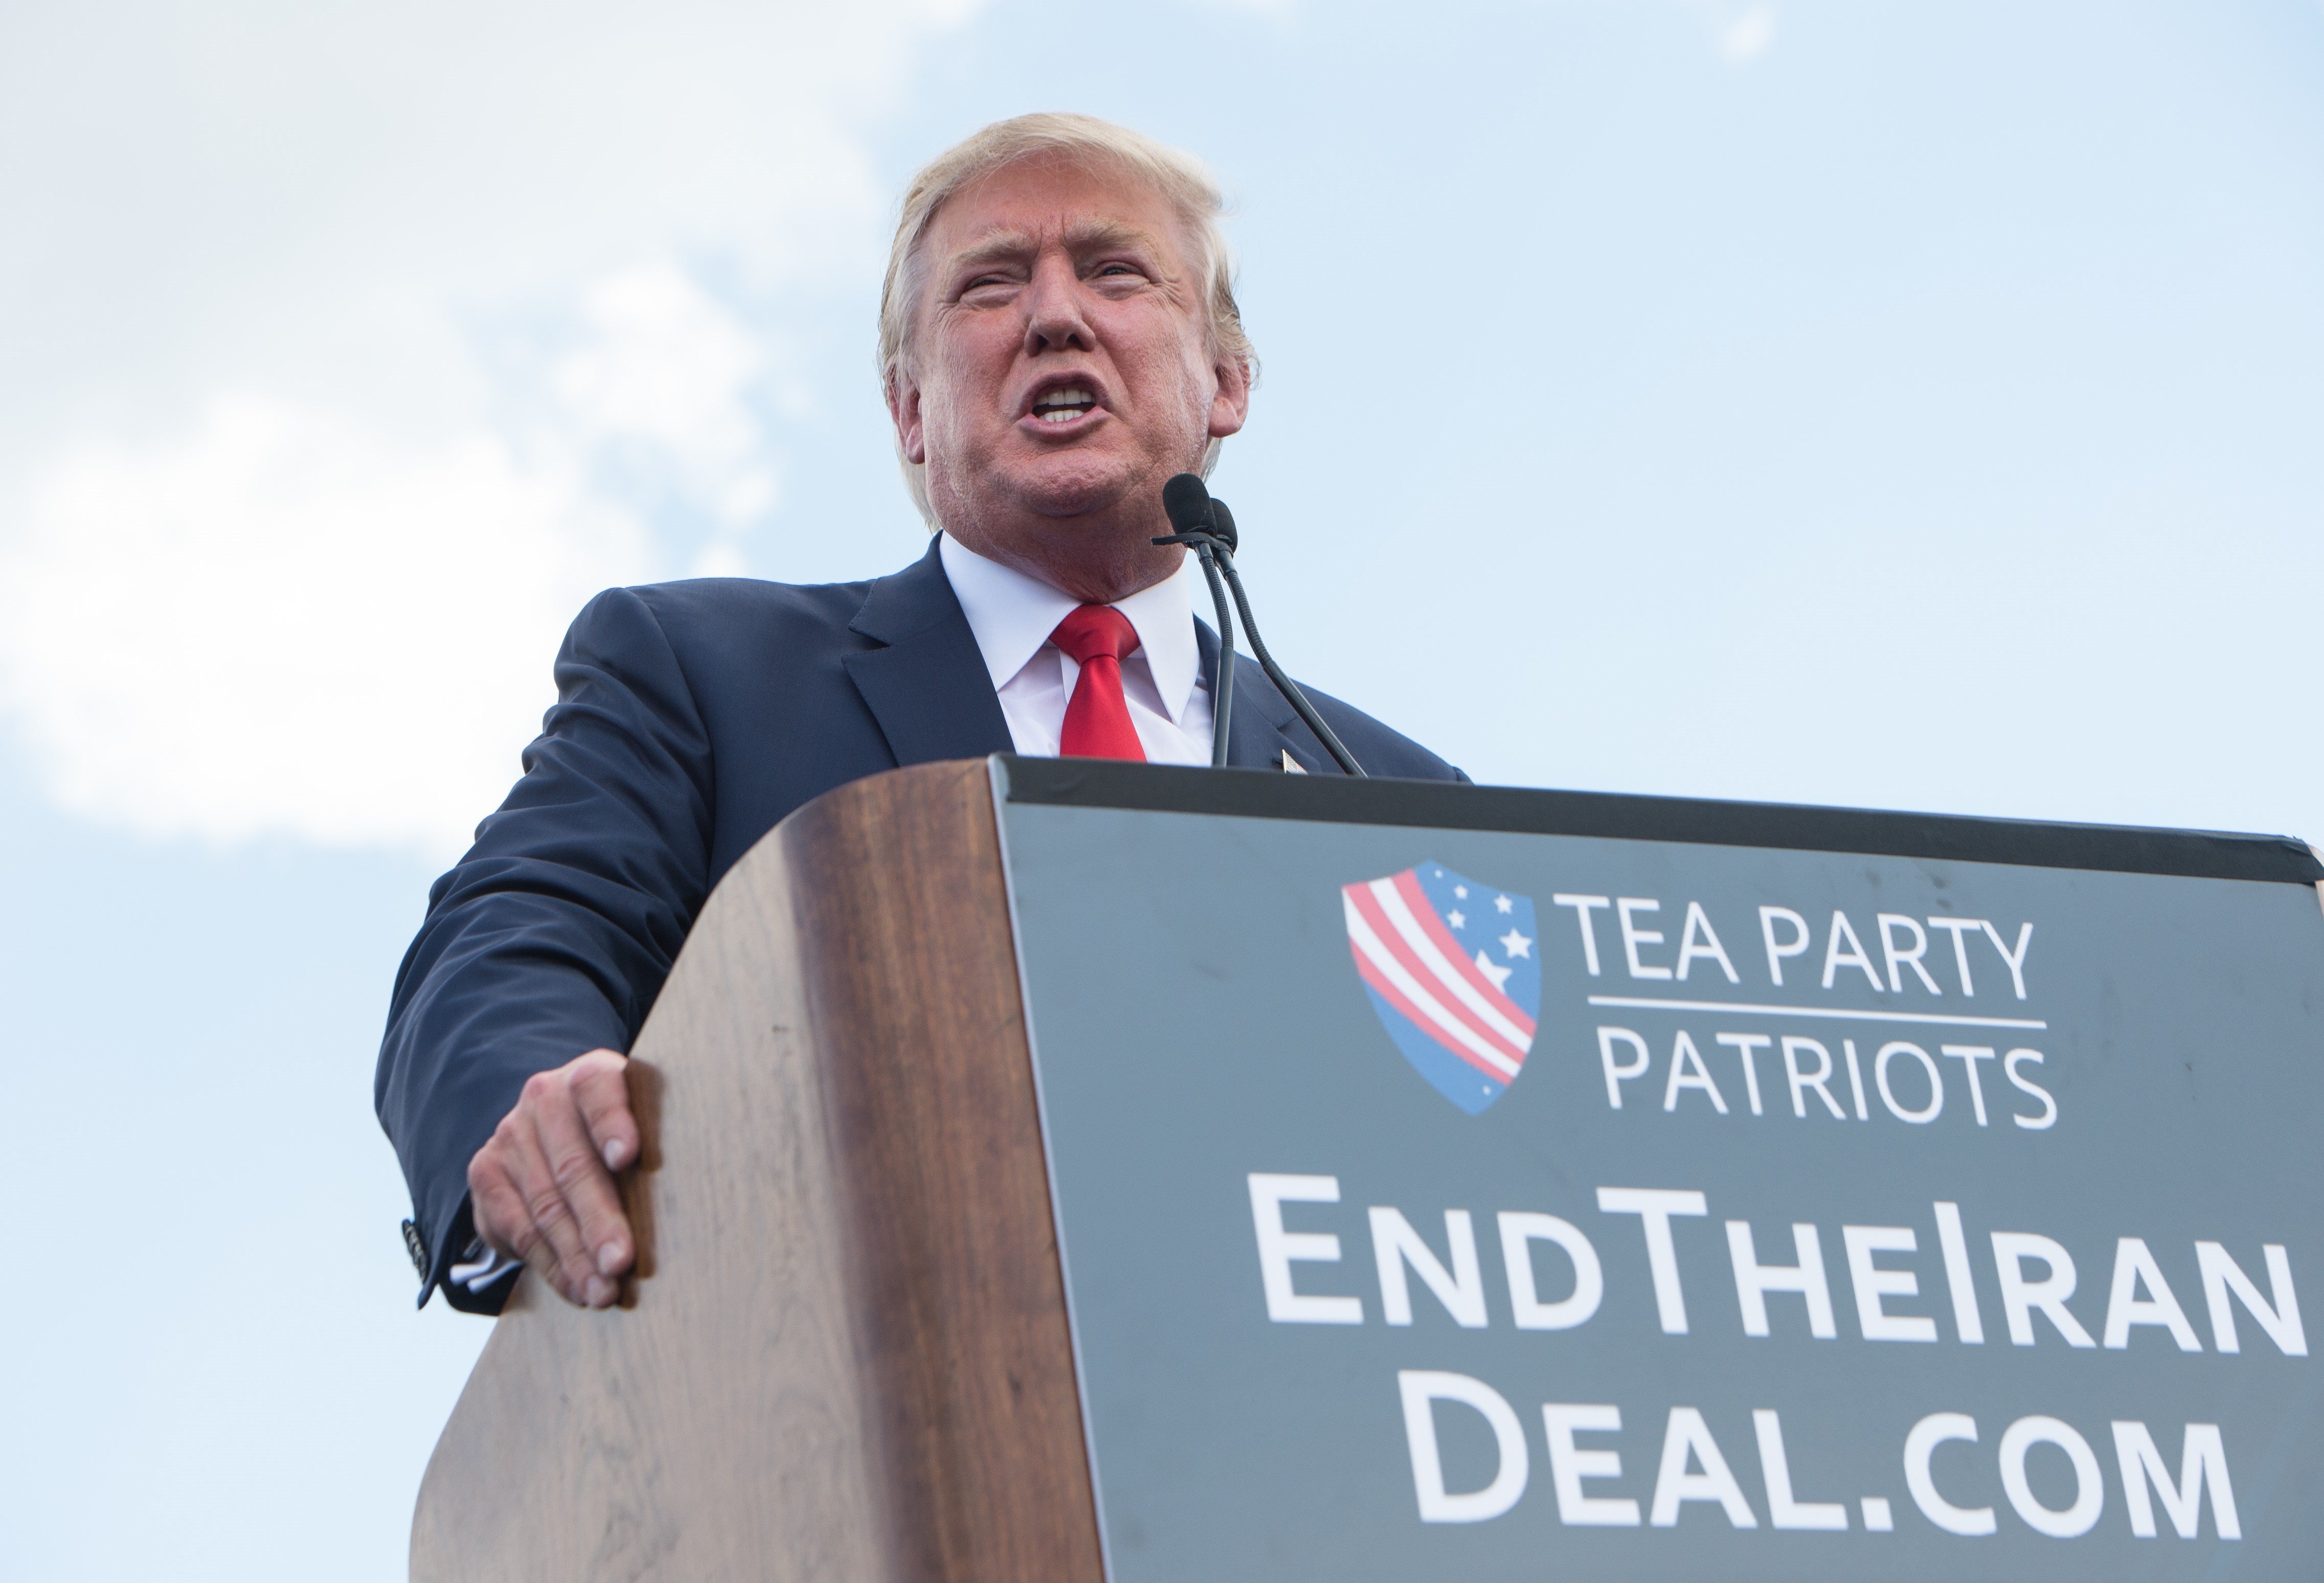 US Republican presidential candidate Donald Trump speaks at a rally organized by the Tea Party Patriots against the Iran nuclear deal in front of the Capitol in Washington, DC, on September 9, 2015. AFP PHOTO/NICHOLAS KAMM (Photo credit should read NICHOLAS KAMM/AFP/Getty Images)